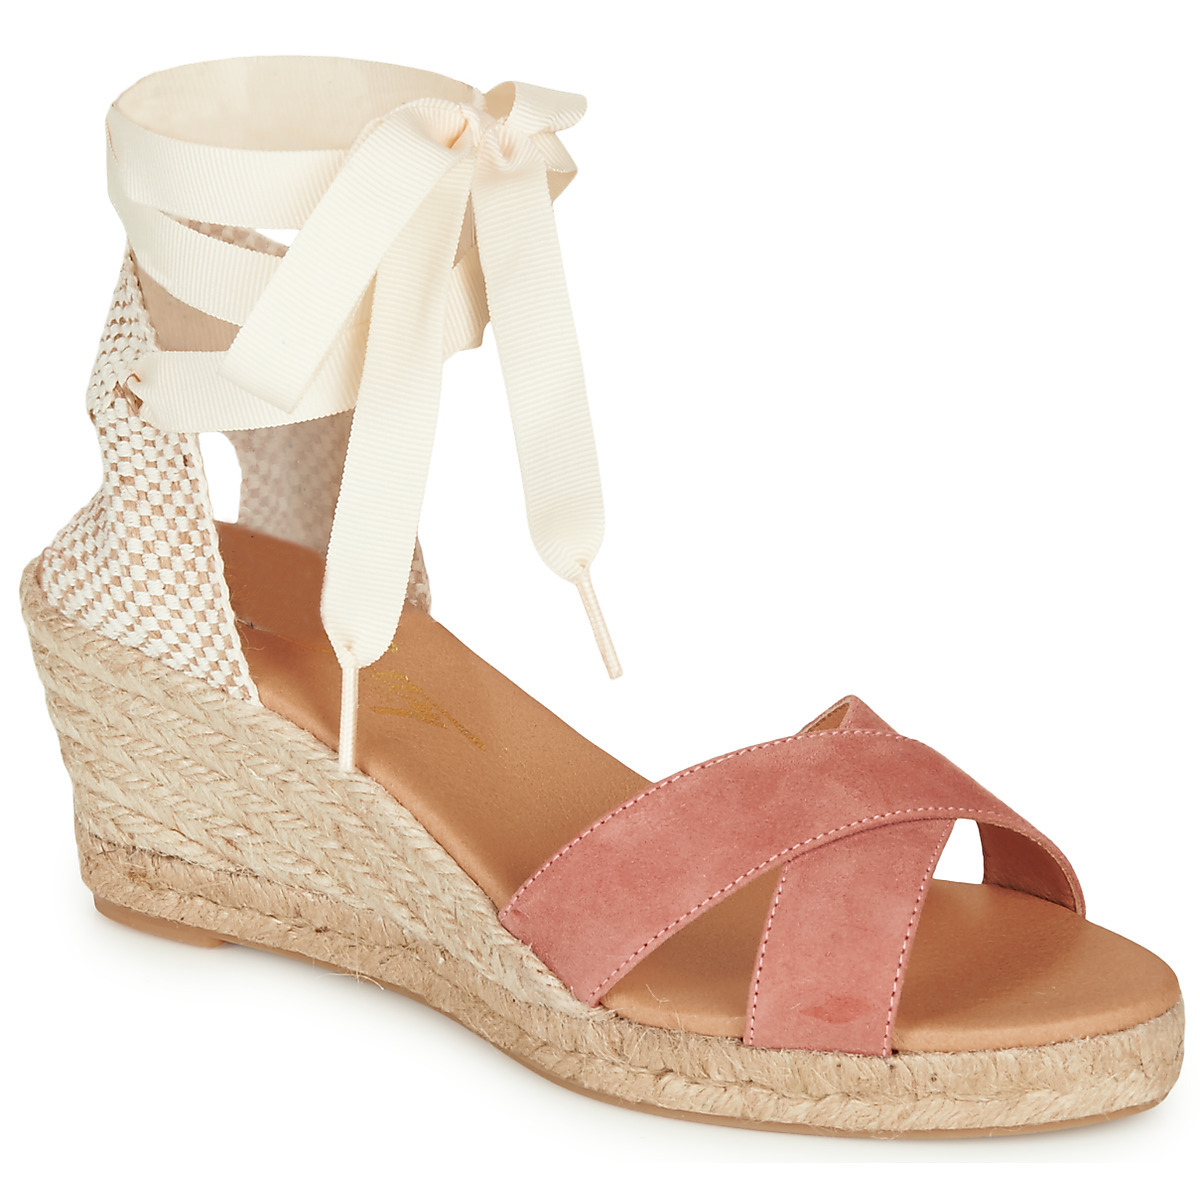 Betty London - Sandals in Pink for Women at Spartoo GOOFASH